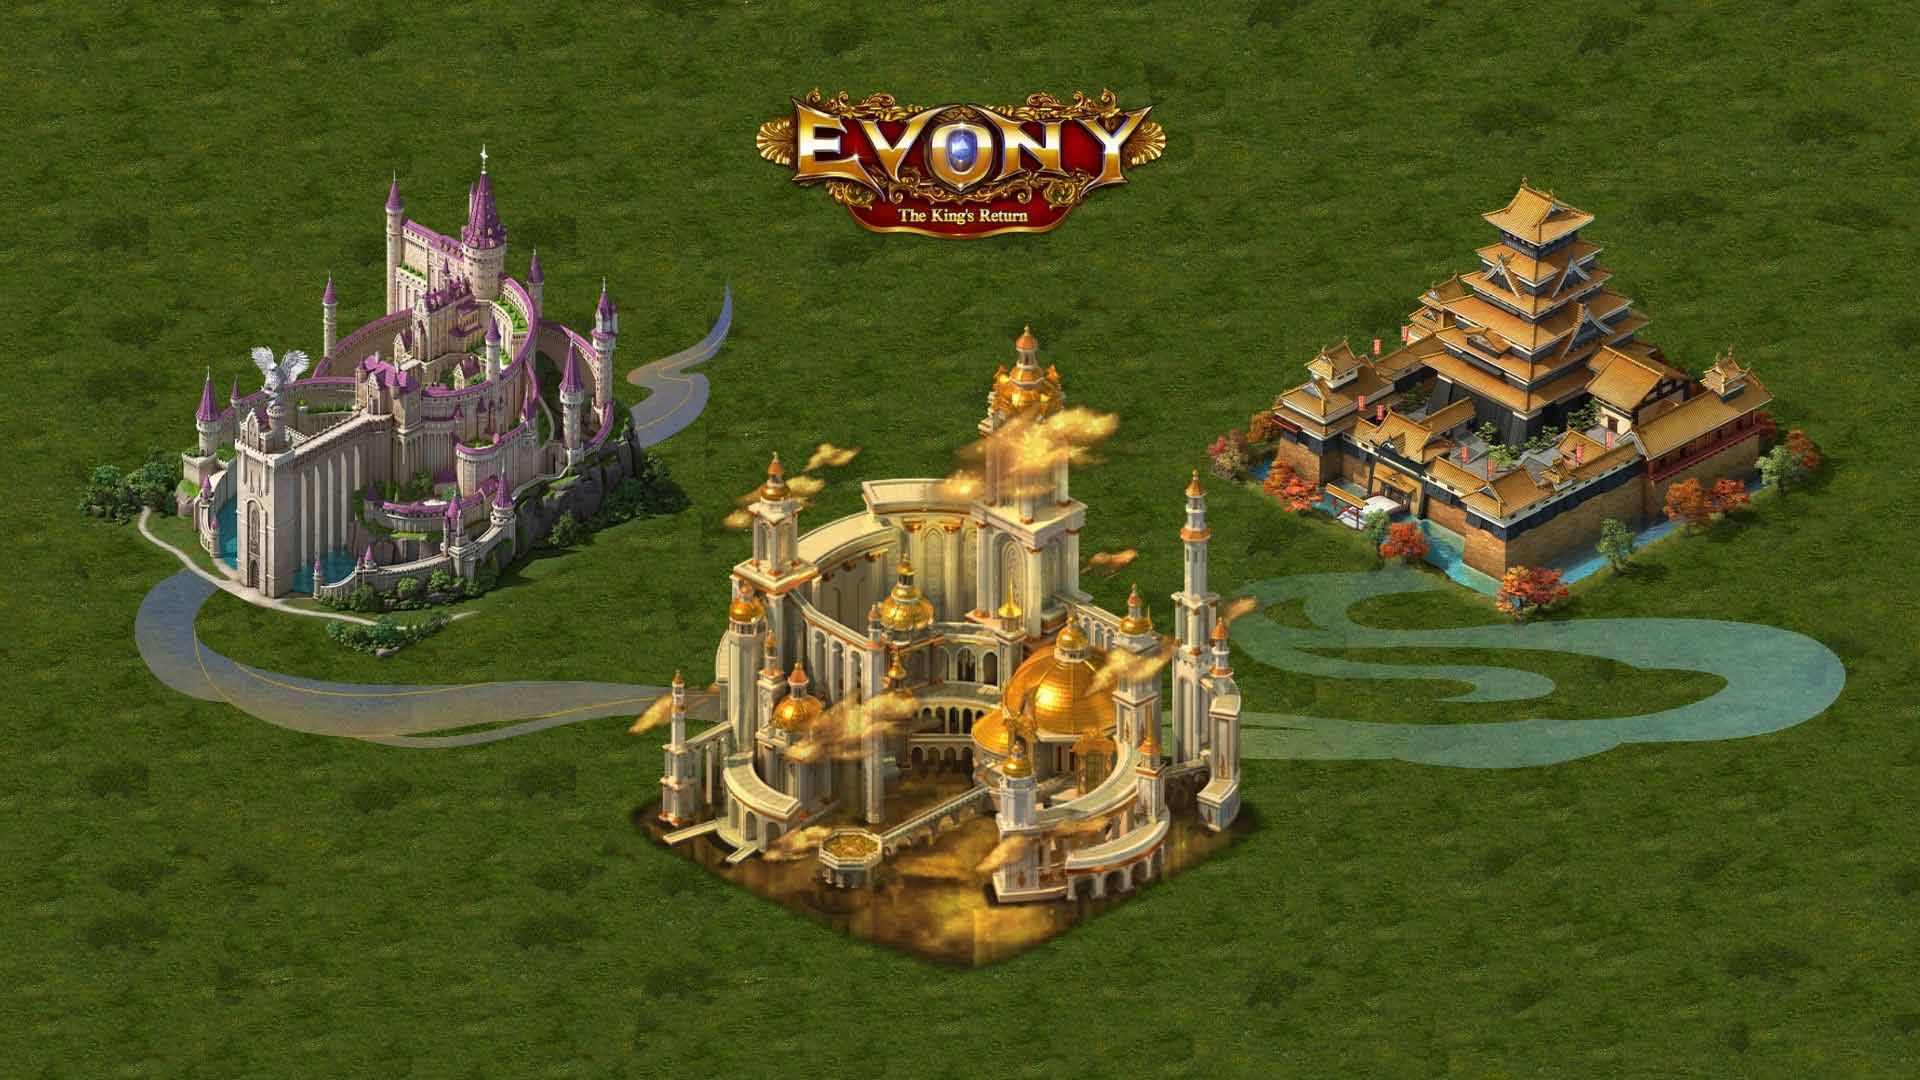 Glowing City Castle Decoration in Evony's Lost Treasures Event